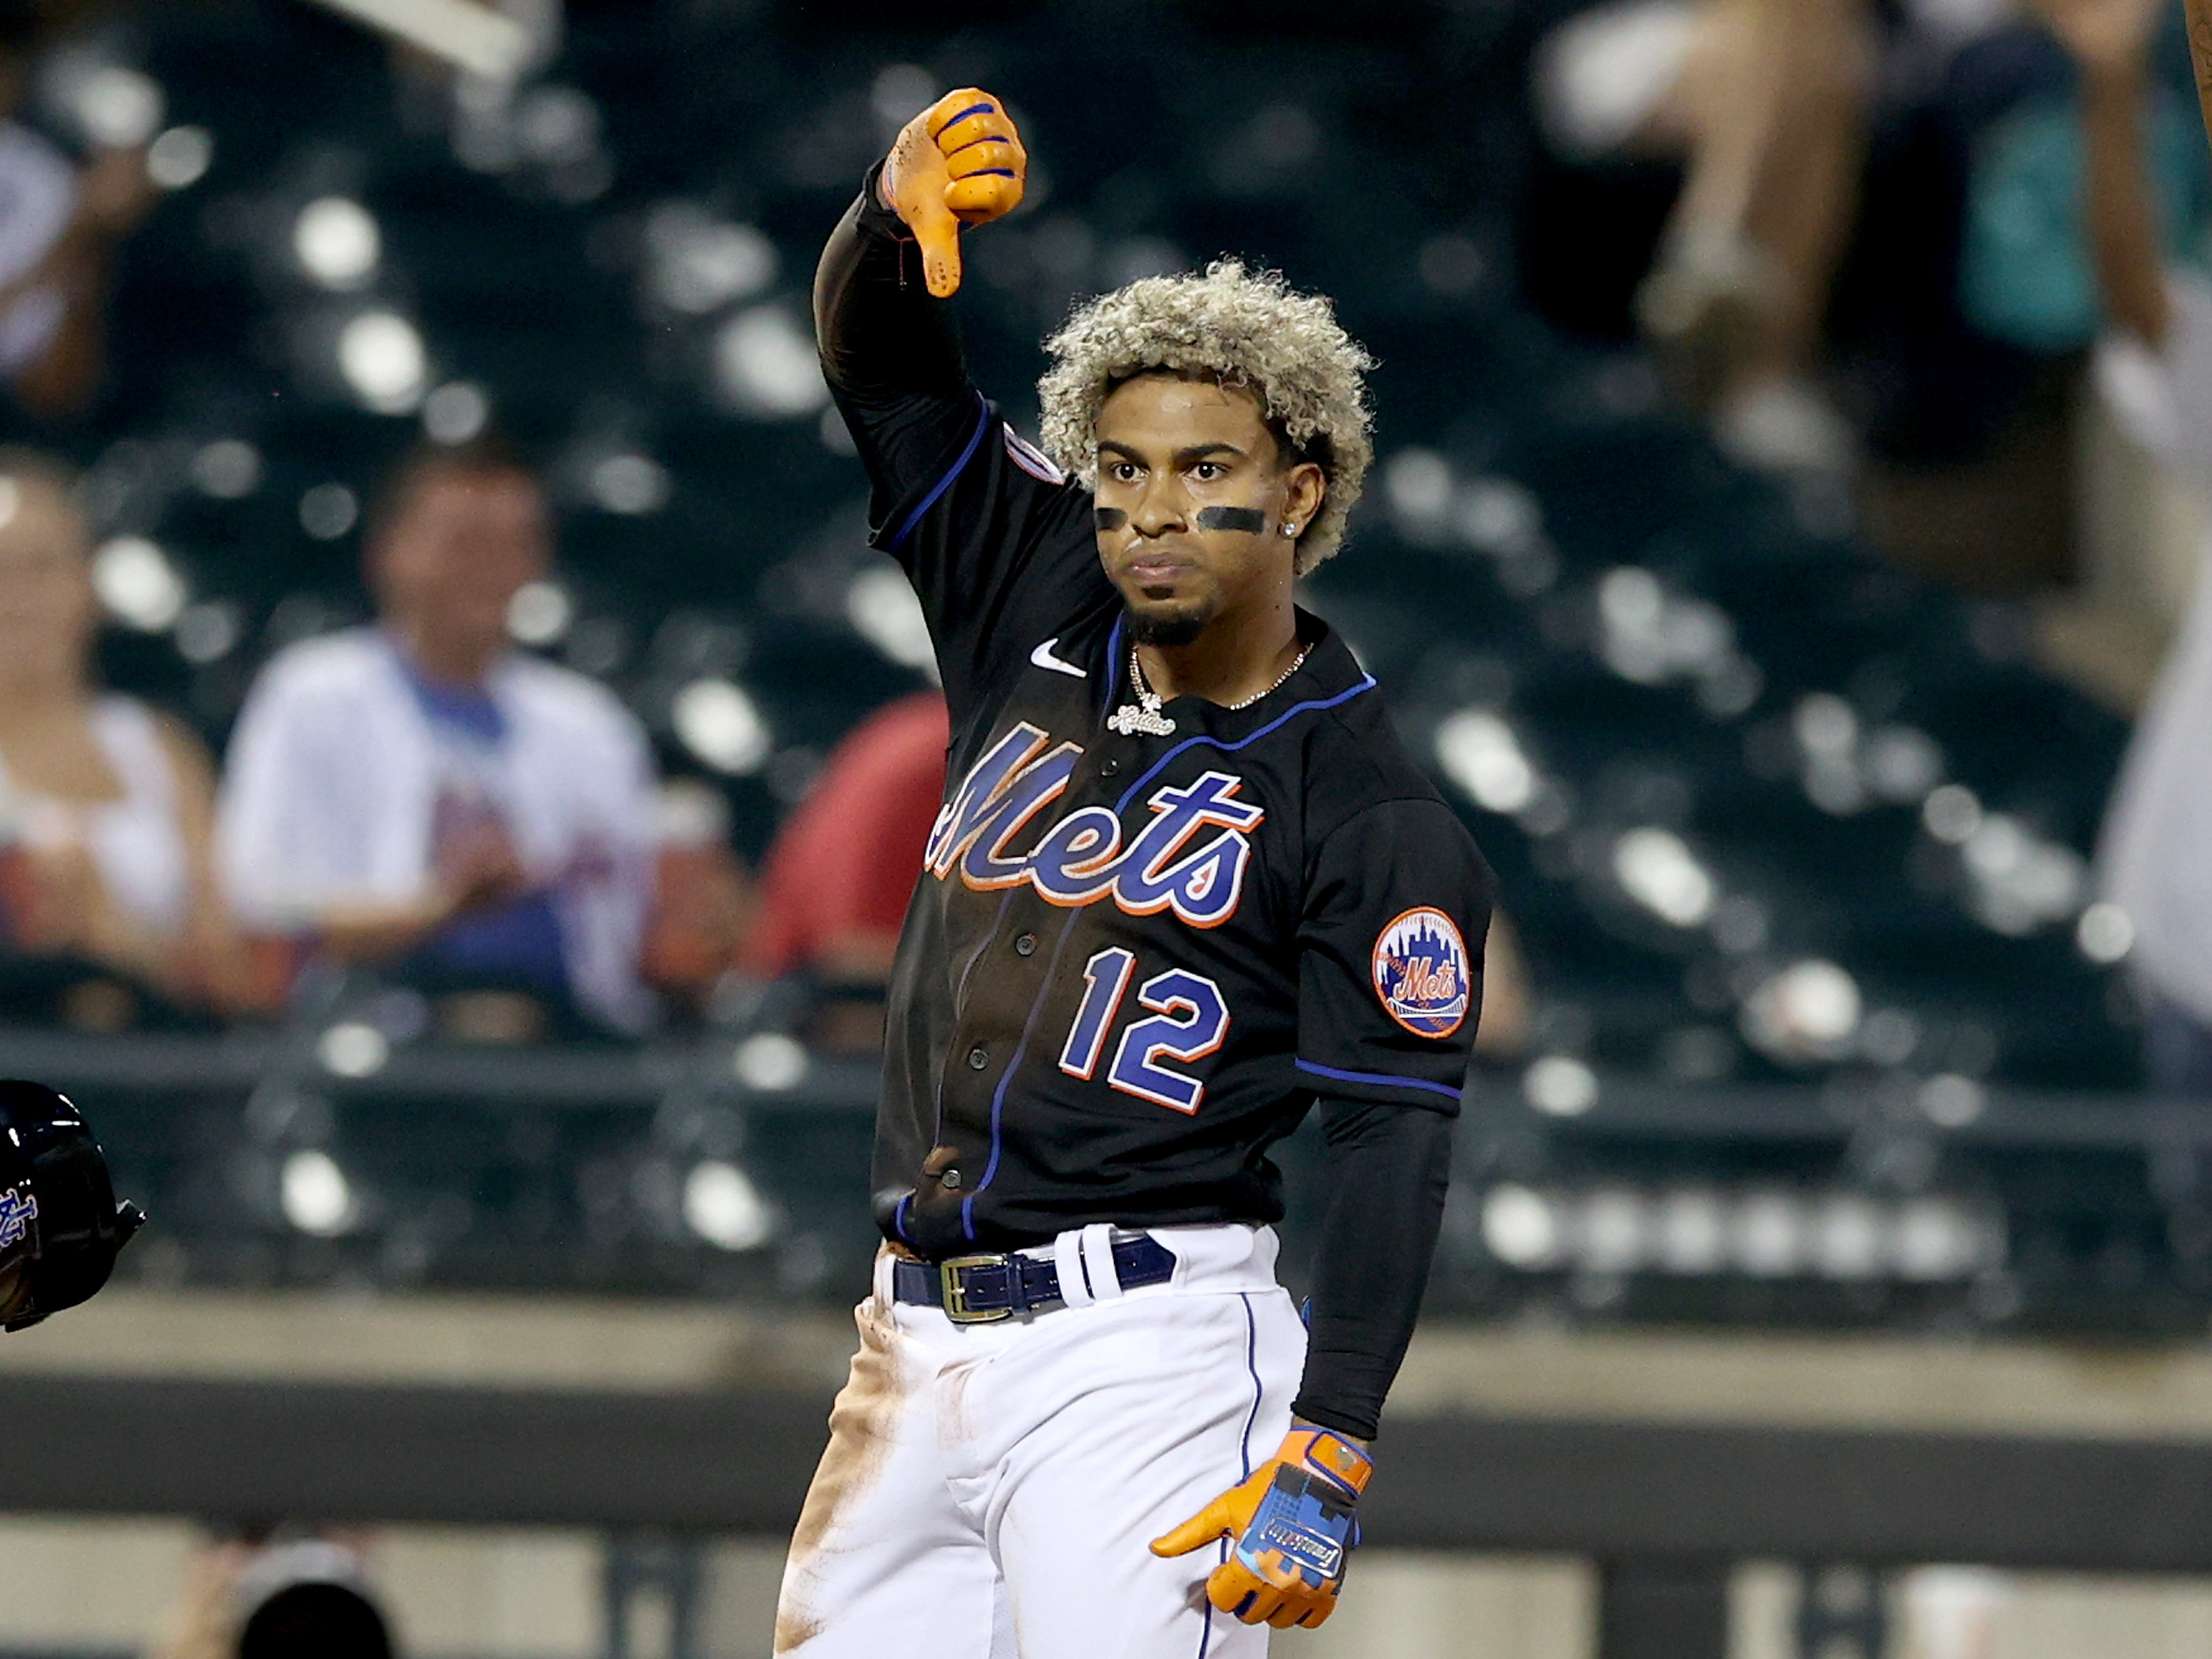 Mets shortstop Francisco Lindor makes the thumbs-down after a triple in a game against the Washington Nationals